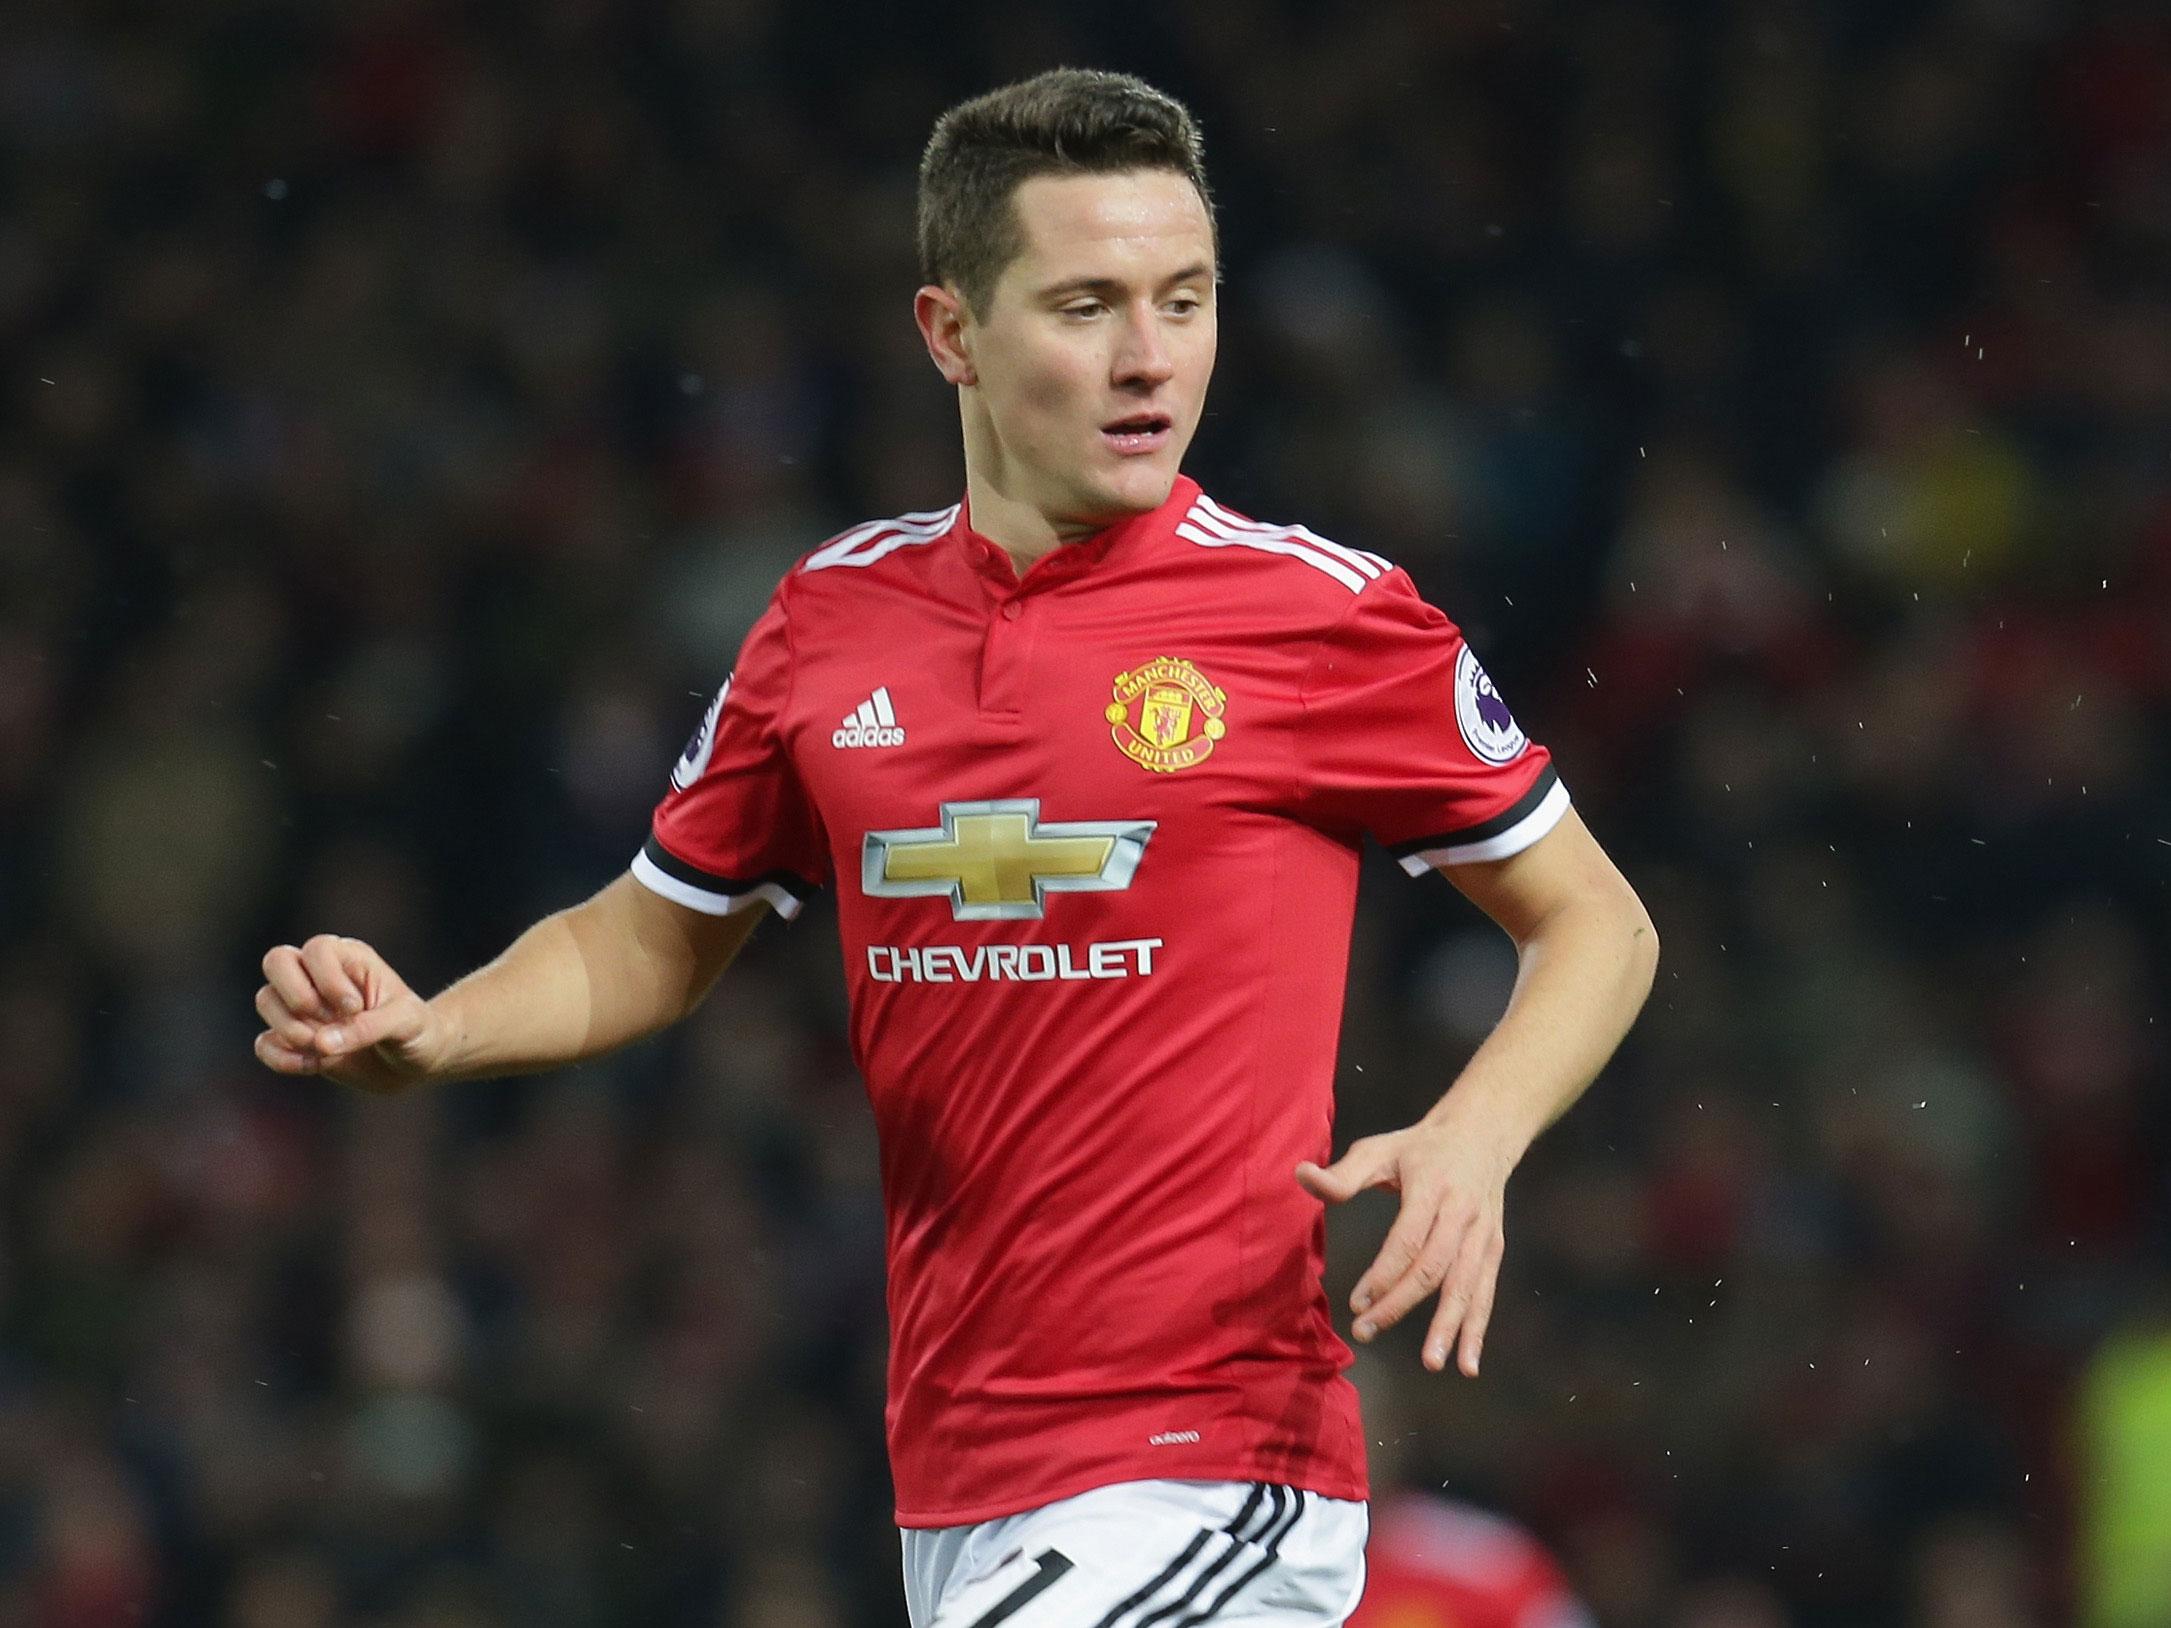 Ander Herrera one of 36 footballers facing jail and six-year football ban over alleged match-fixing scandal